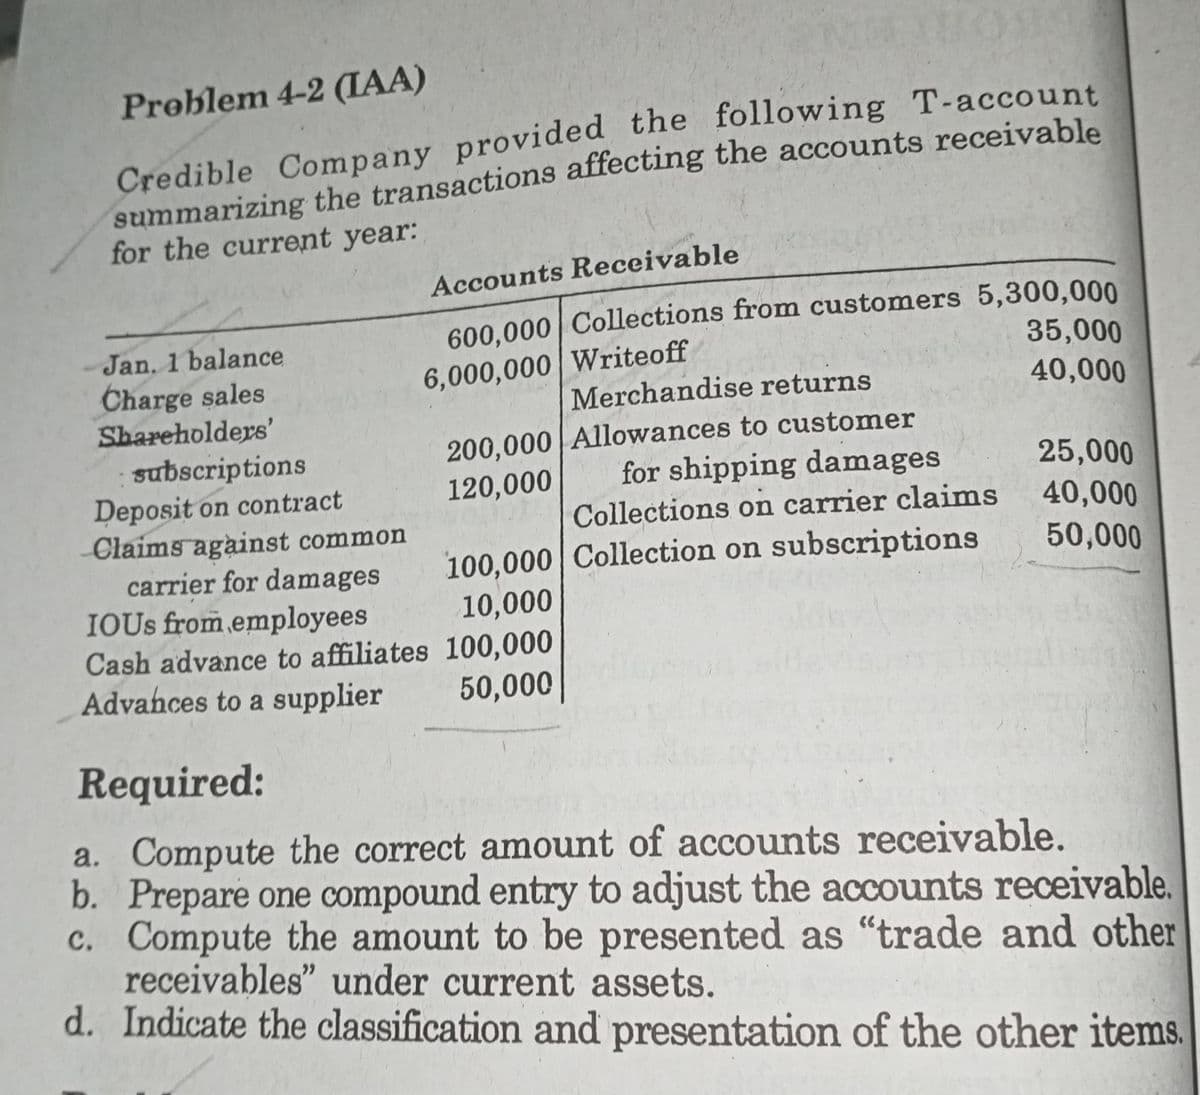 Preblem 4-2 (IAA)
Credible Company provided the following T-account
summarizing the transactions affecting the accounts receivable
for the current year:
Accounts Receivable
600.000 Collections from customers 5,300,000
35,000
Jan. 1 balance
Charge sales
Shareholders'
6,000,000 Writeoff
Merchandise returns
40,000
subscriptions
Deposit on contract
Claims against common
carrier for damages
IOUS from employees
Cash advance to affiliates 100,000
Advahces to a supplier
200,000 Allowances to customer
for shipping damages
Collections on carrier claims
100,000| Collection on subscriptions
25,000
120,000
40,000
50,000
10,000
50,000
Required:
a. Compute the correct amount of accounts receivable.
b. Prepare one compound entry to adjust the accounts receivable.
c. Compute the amount to be presented as "trade and other
receivables" under current assets.
d. Indicate the classification and presentation of the other items.
